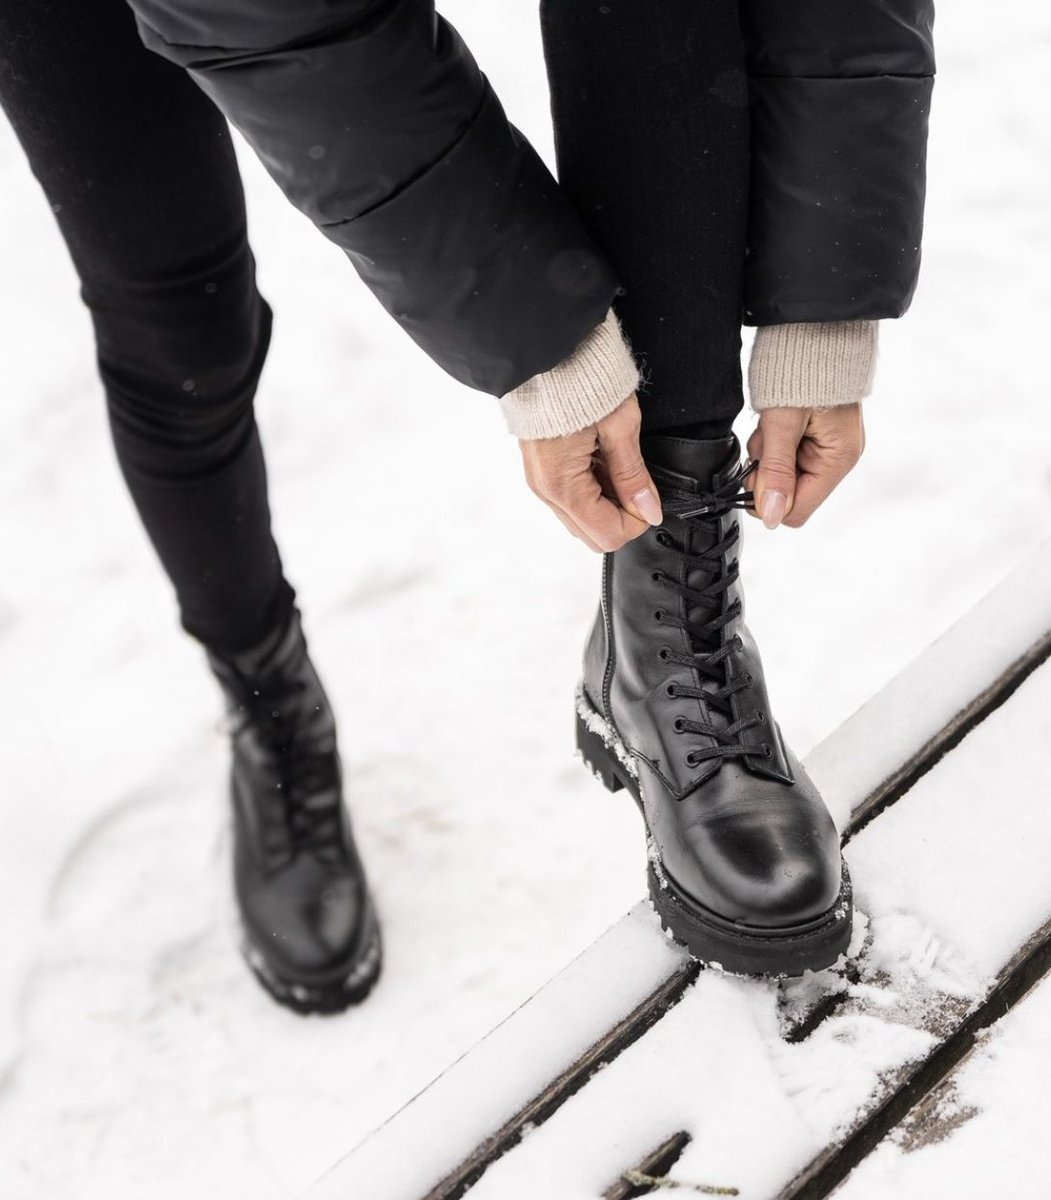 Combating the Snow ❄️😉💯
📸: @gyzhong
#ThursdayBoots #WinterBoots 
#CombatBoots #WomensStyle